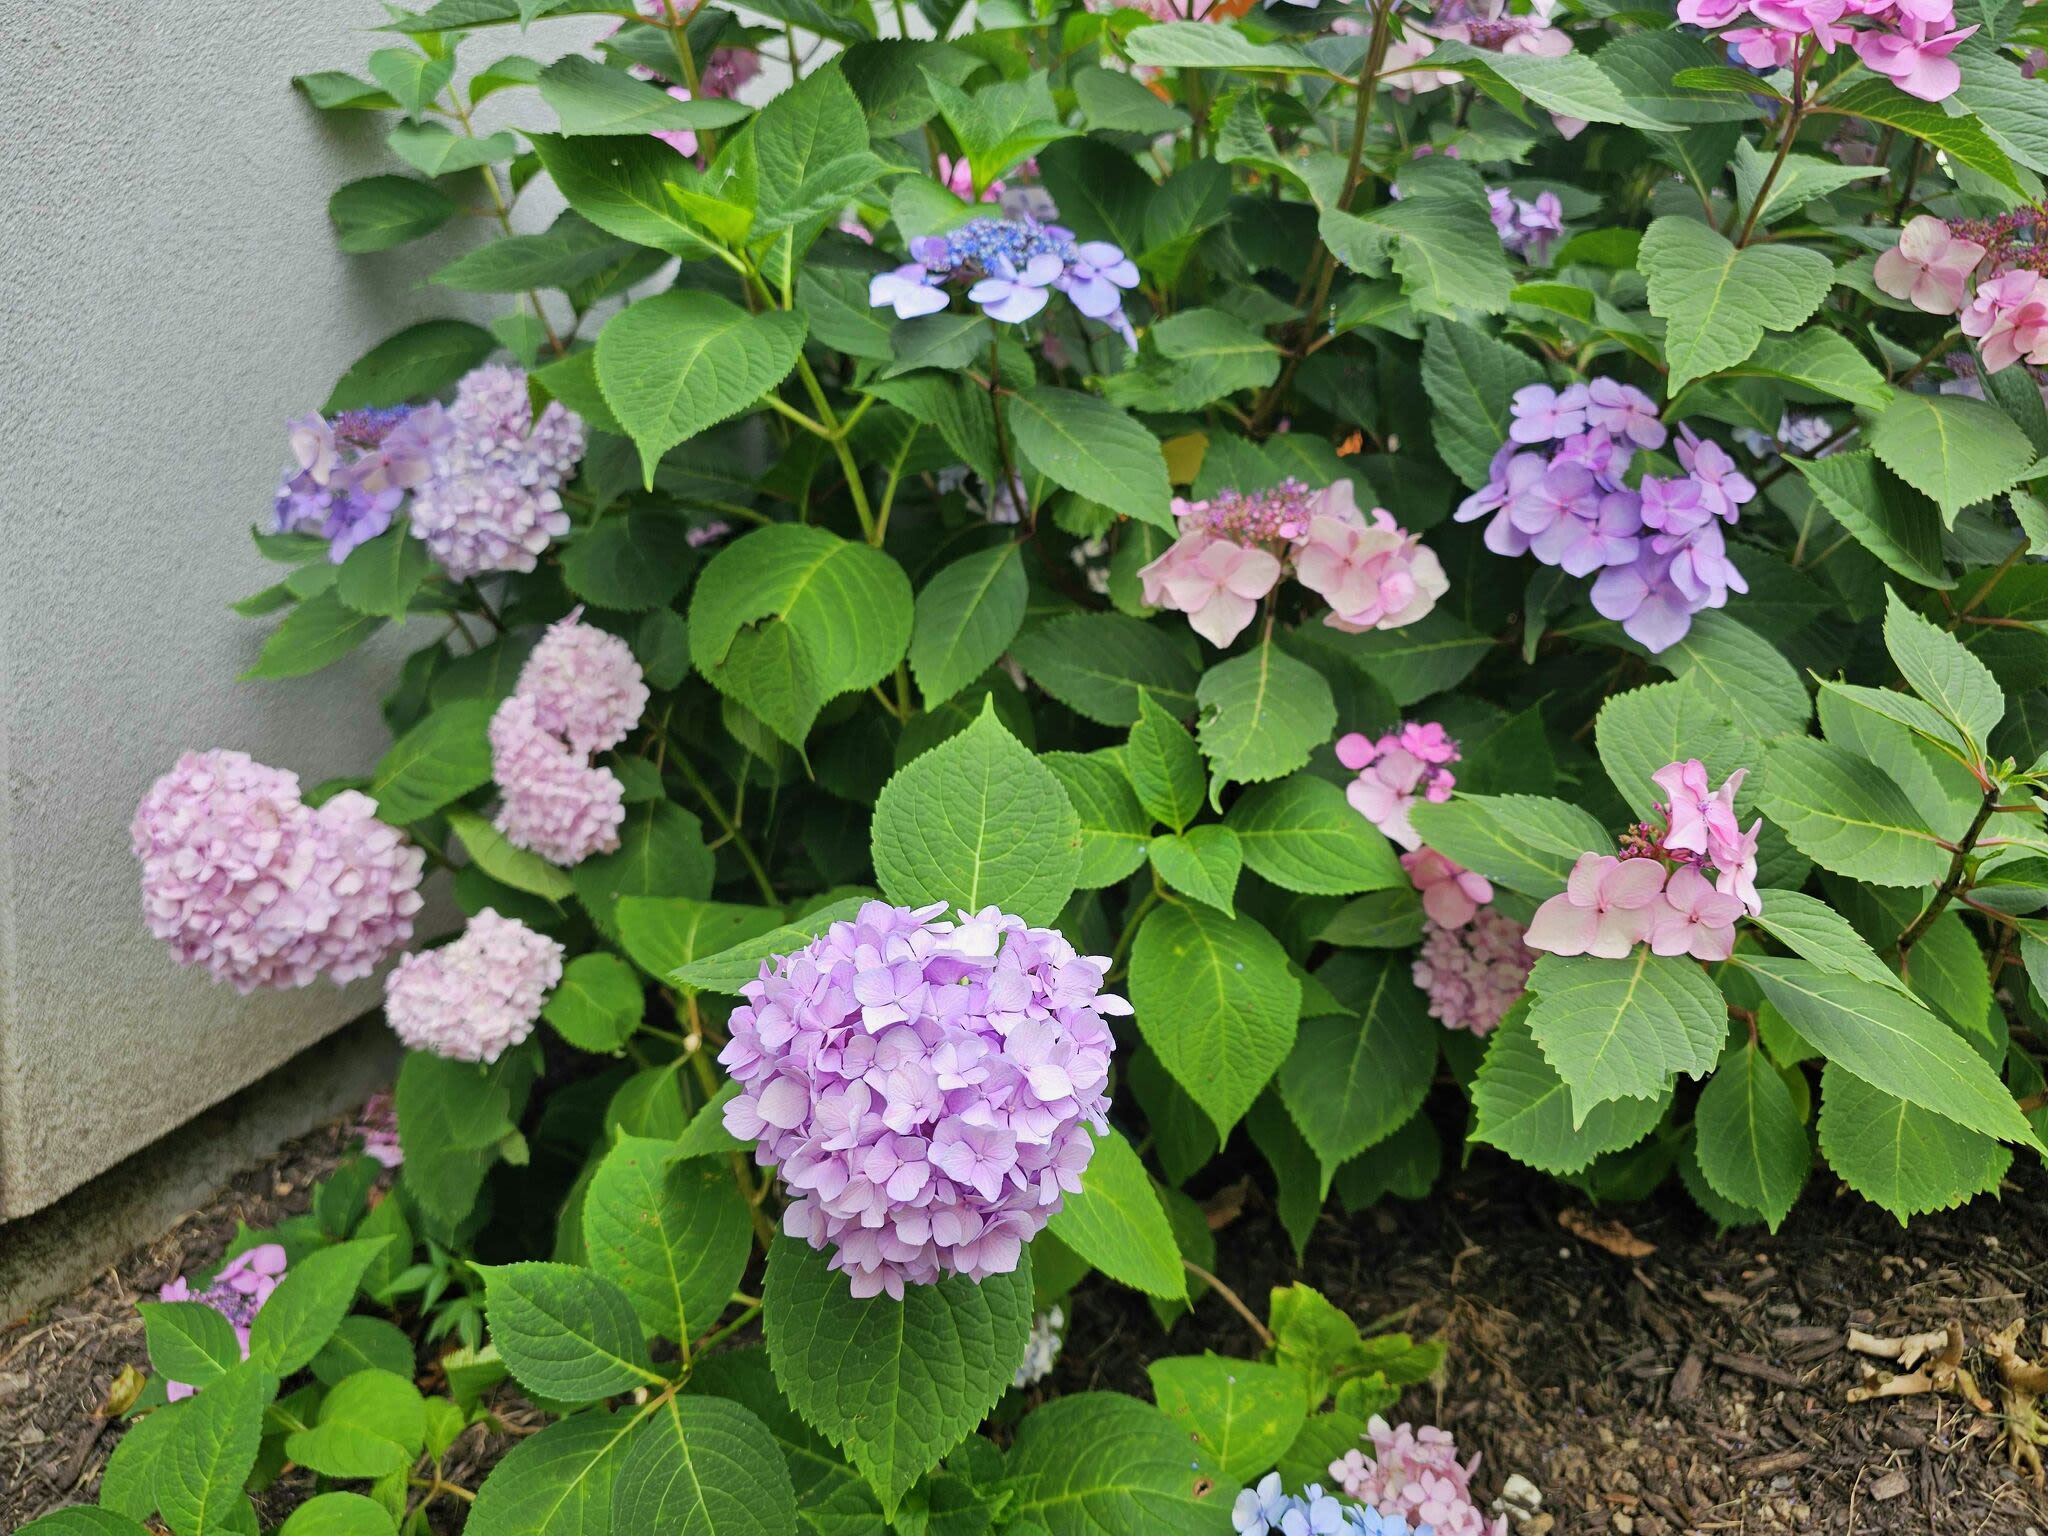 Maintain and care for your hydrangeas this summer with these tips from a UConn Master Gardener